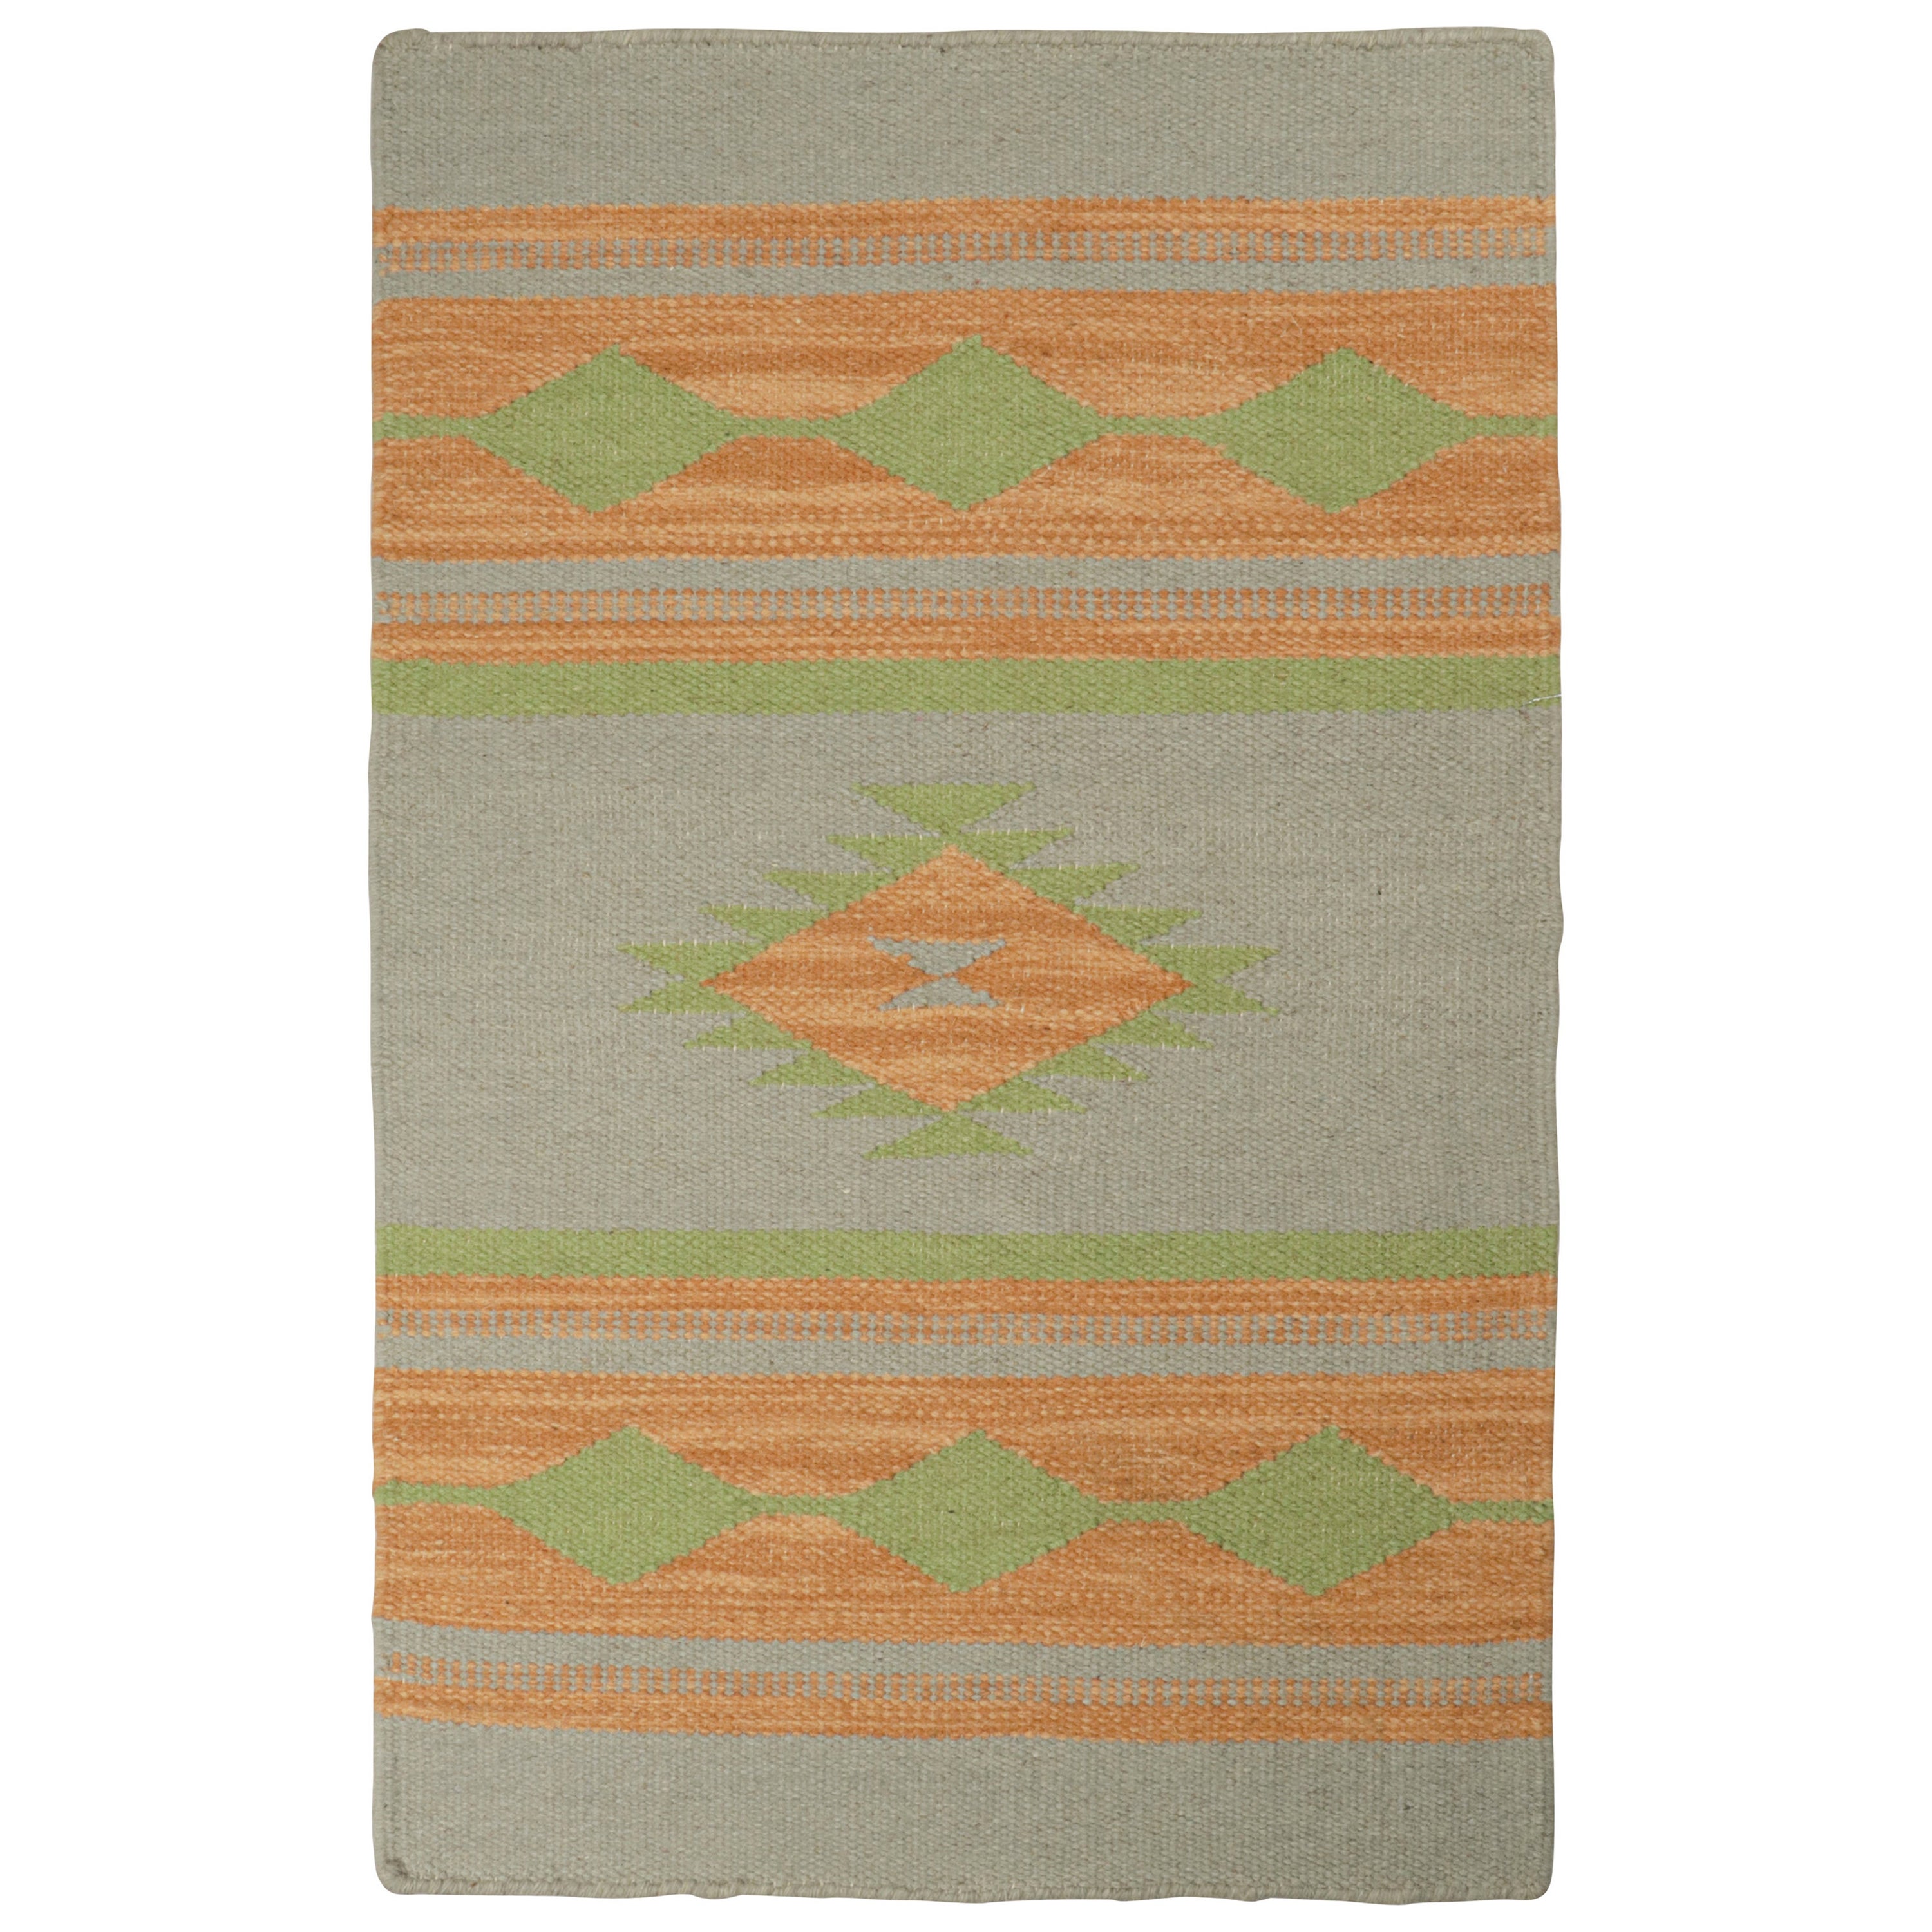 Rug & Kilim’s Tribal style Kilim in Grey with Gold & Green Patterns For Sale